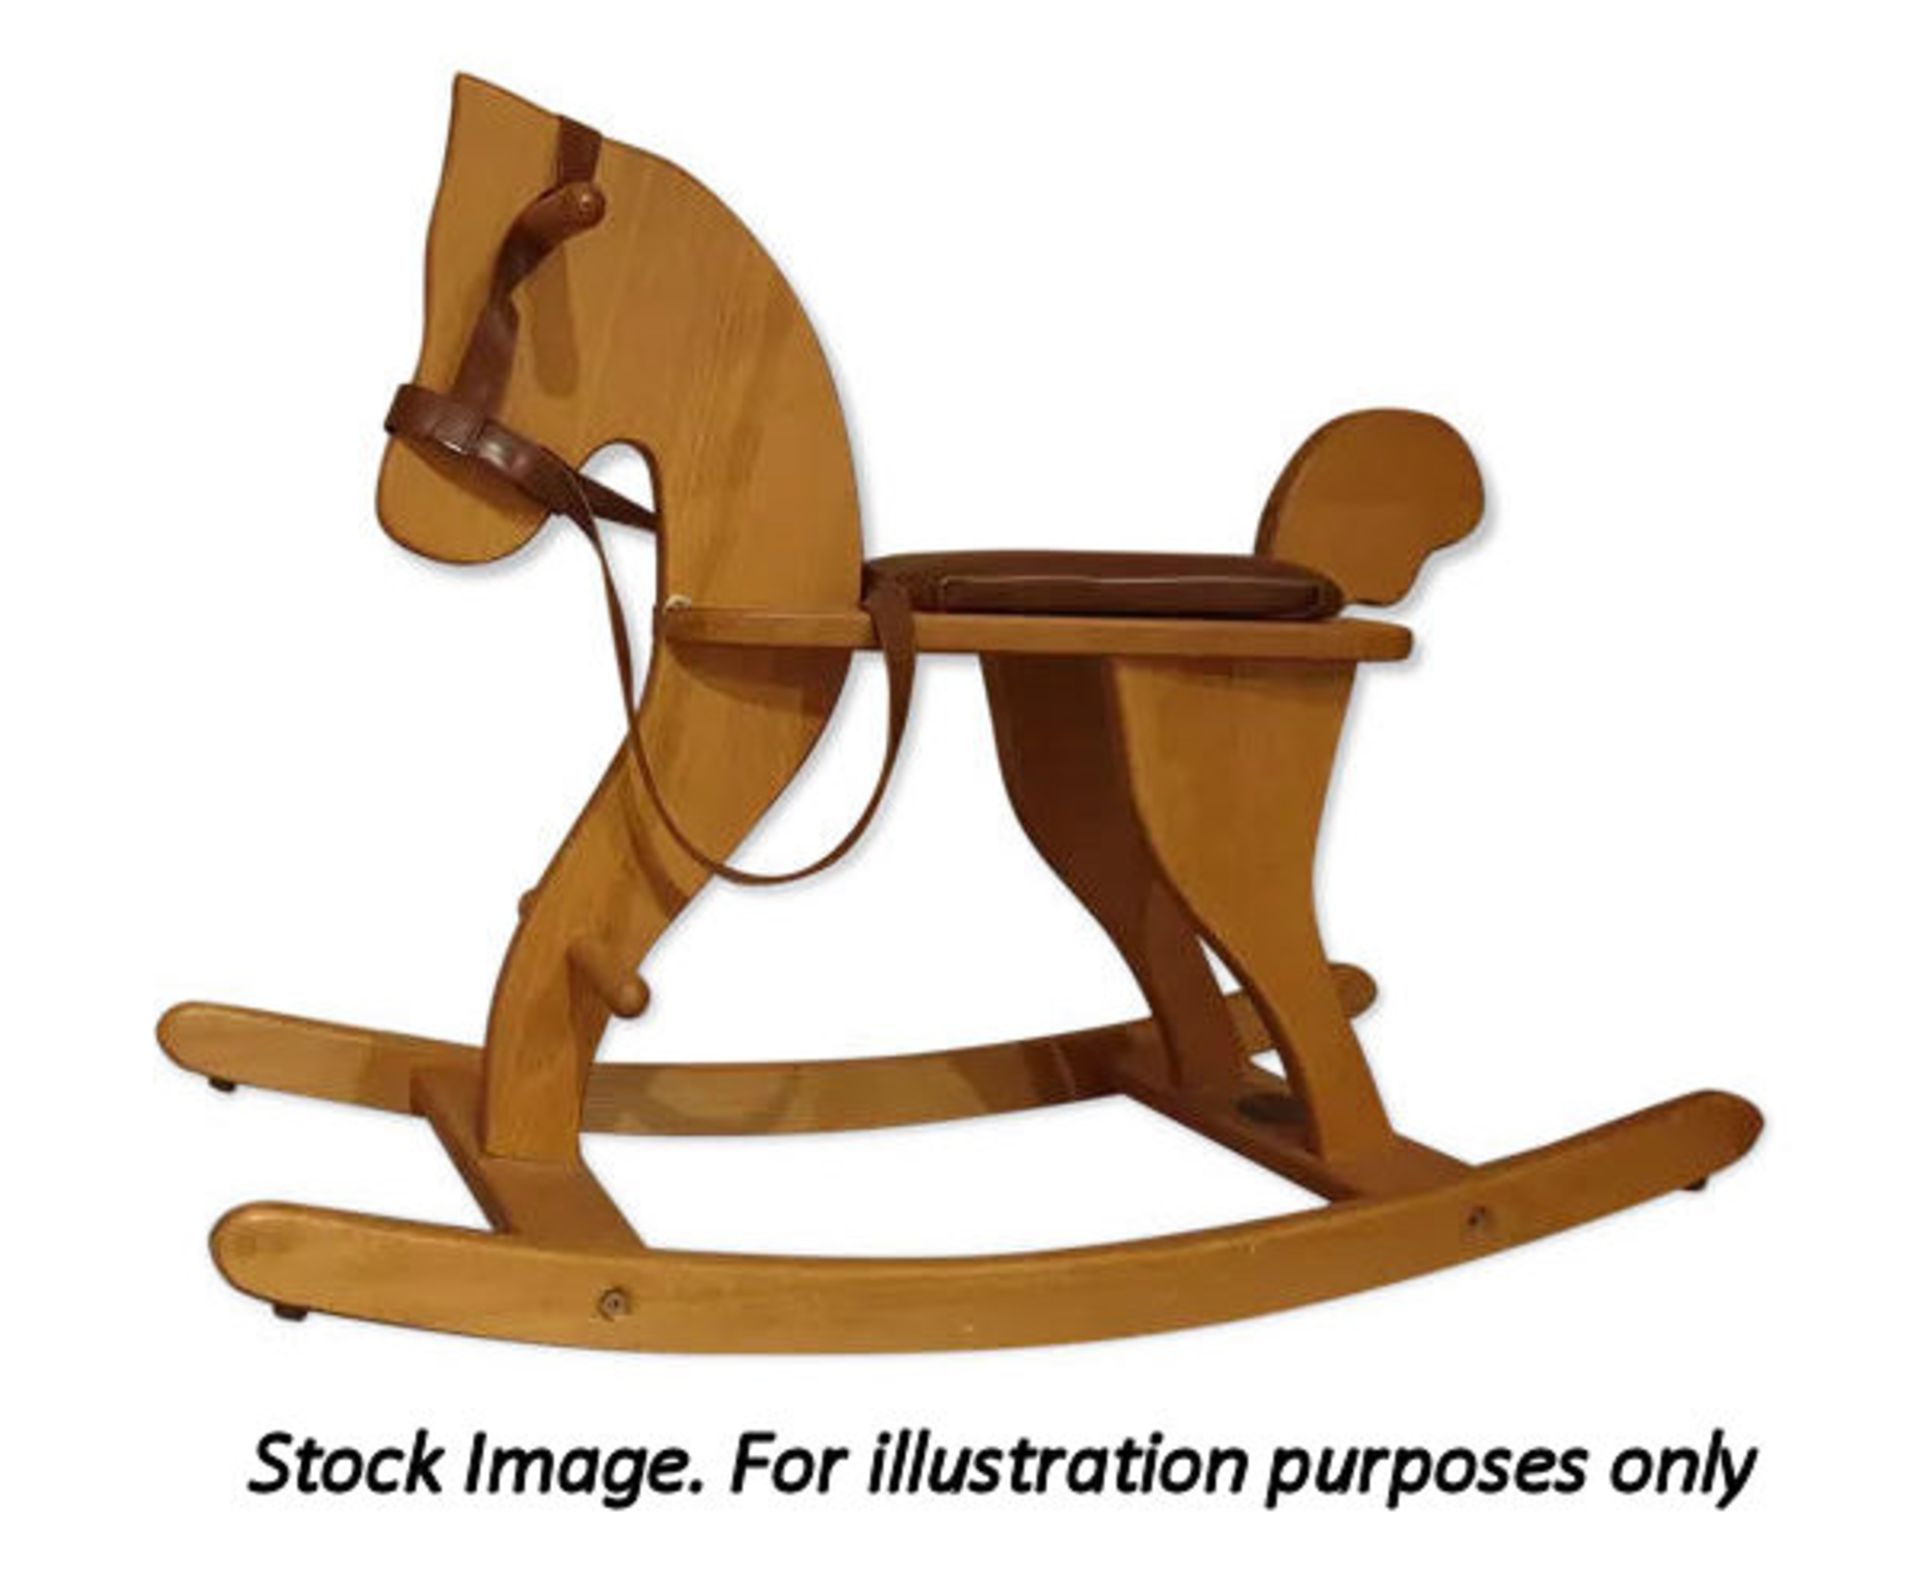 1 x Moulin Roty Cheval a Bascule Wooden Rocking Horse - New/Boxed - HTYS311 - CL987 - Location: